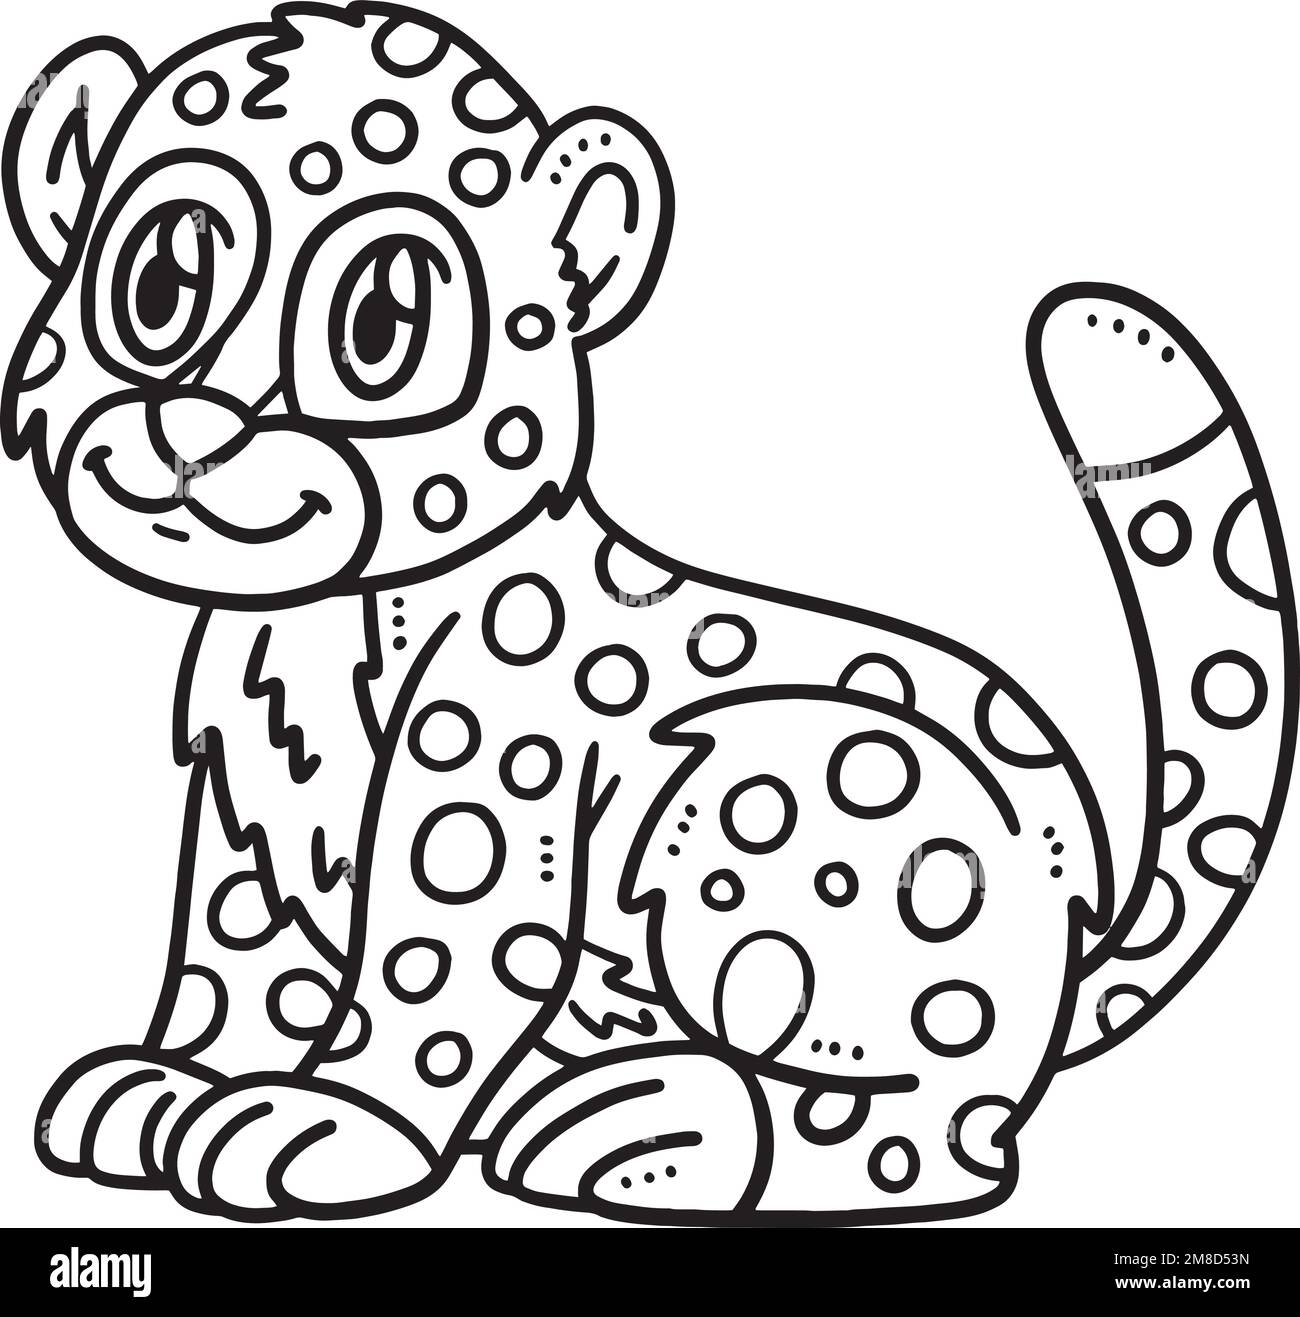 Cheetah baby drawing Black and White Stock Photos & Images - Alamy